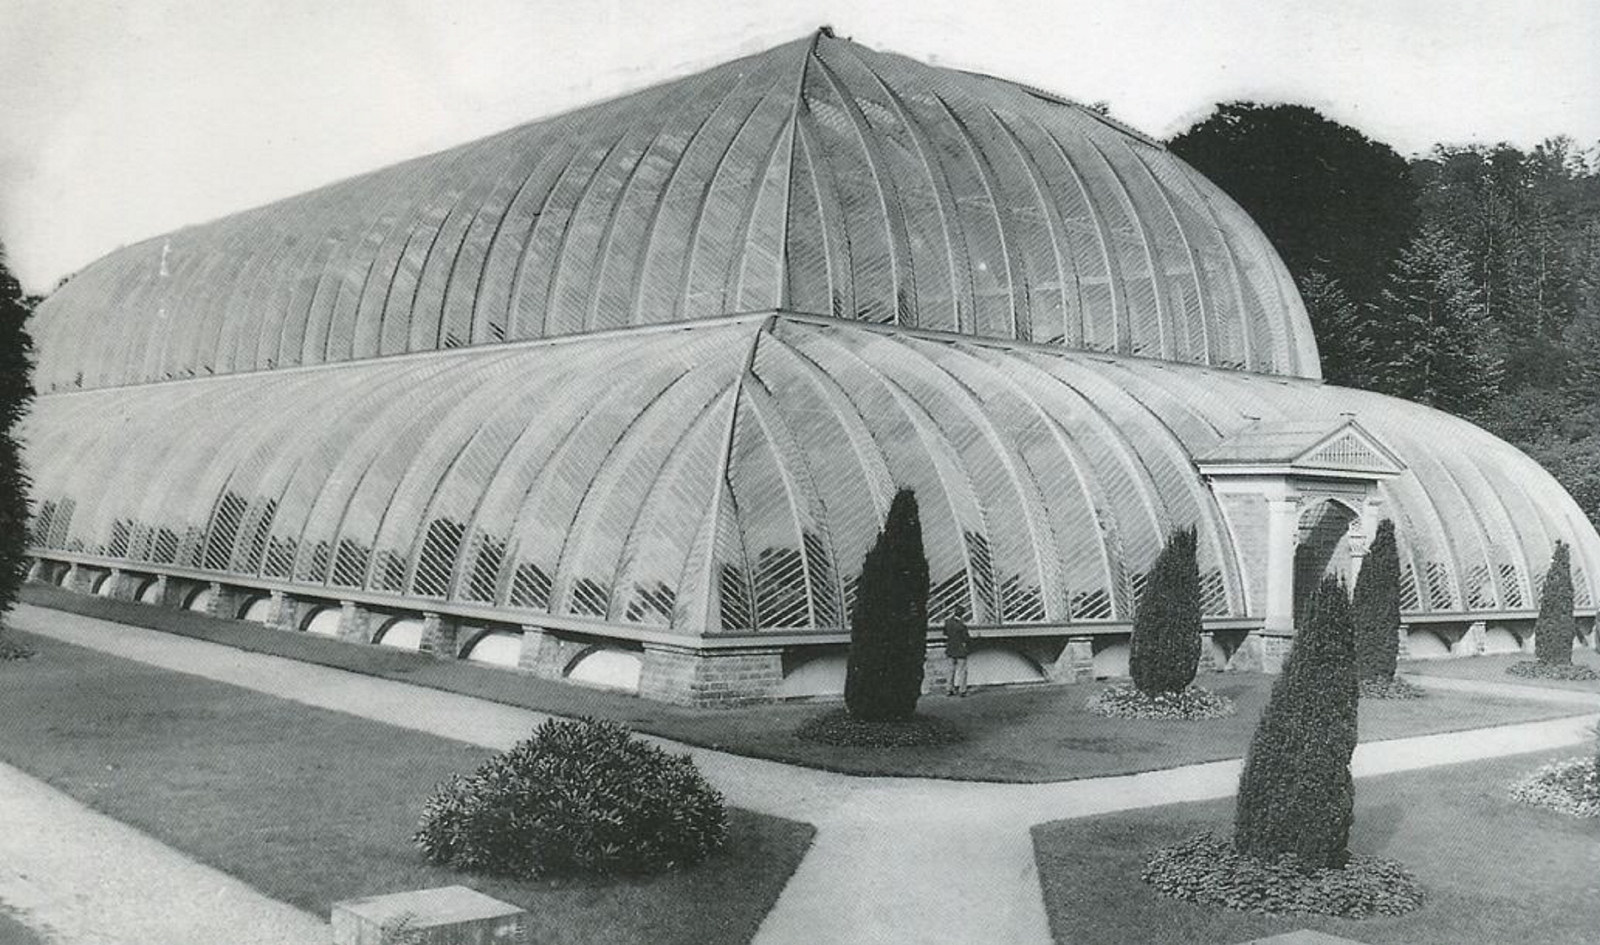 photo of the 'Great Stove' Conservatory at Chatsworth, which is a large glass building with some small shrubs around it.